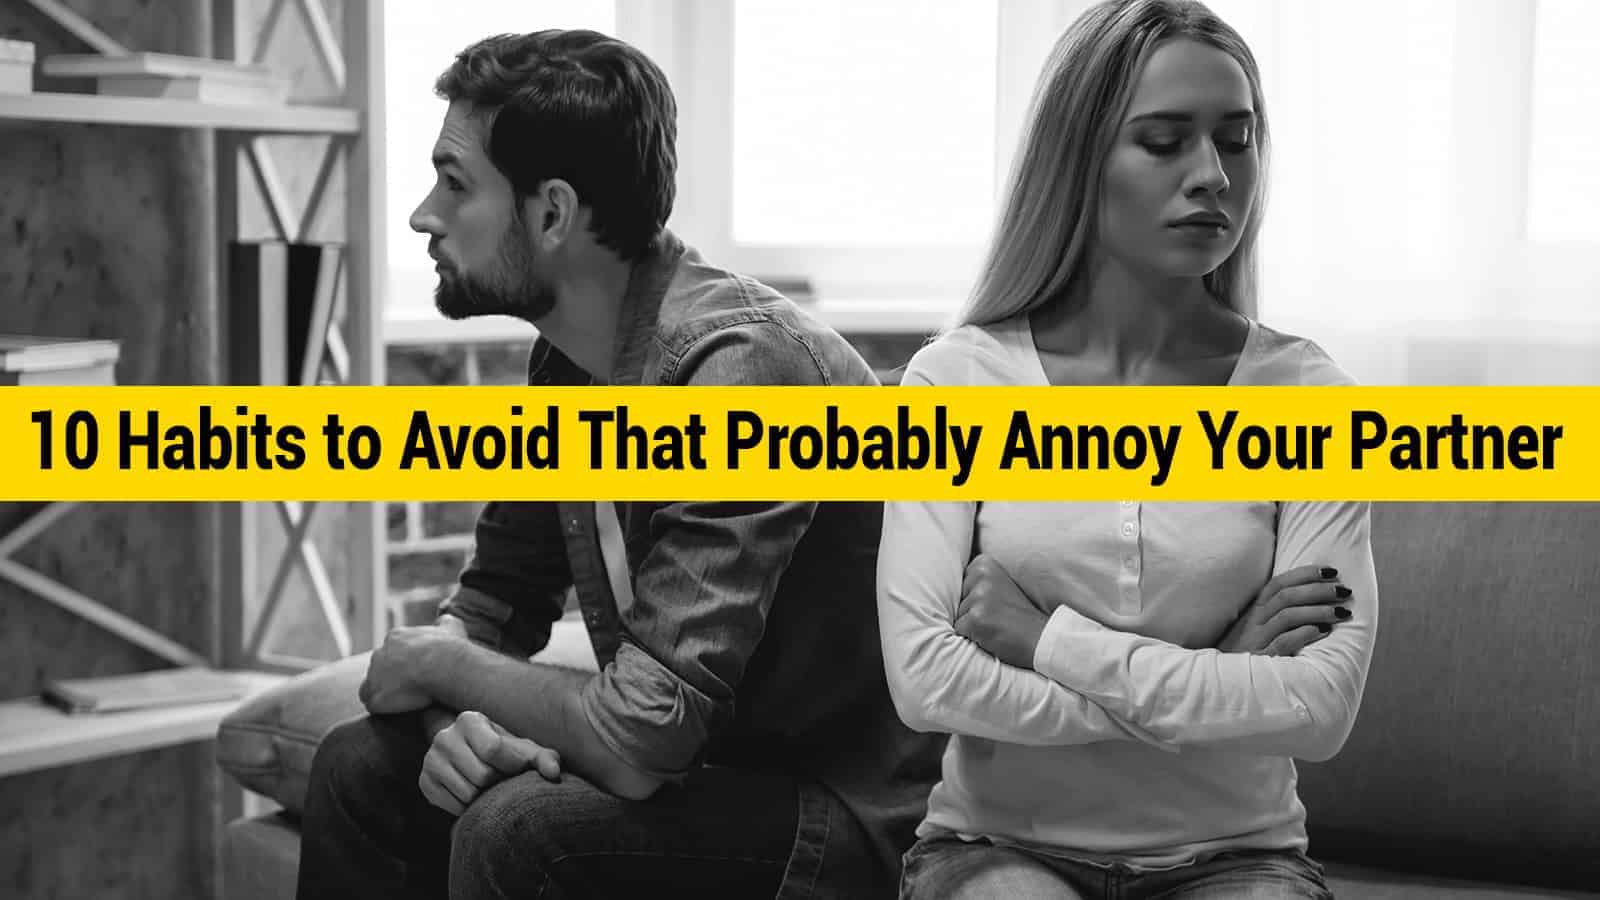 10 Quirky Habits to Avoid That Probably Annoy Your Partner